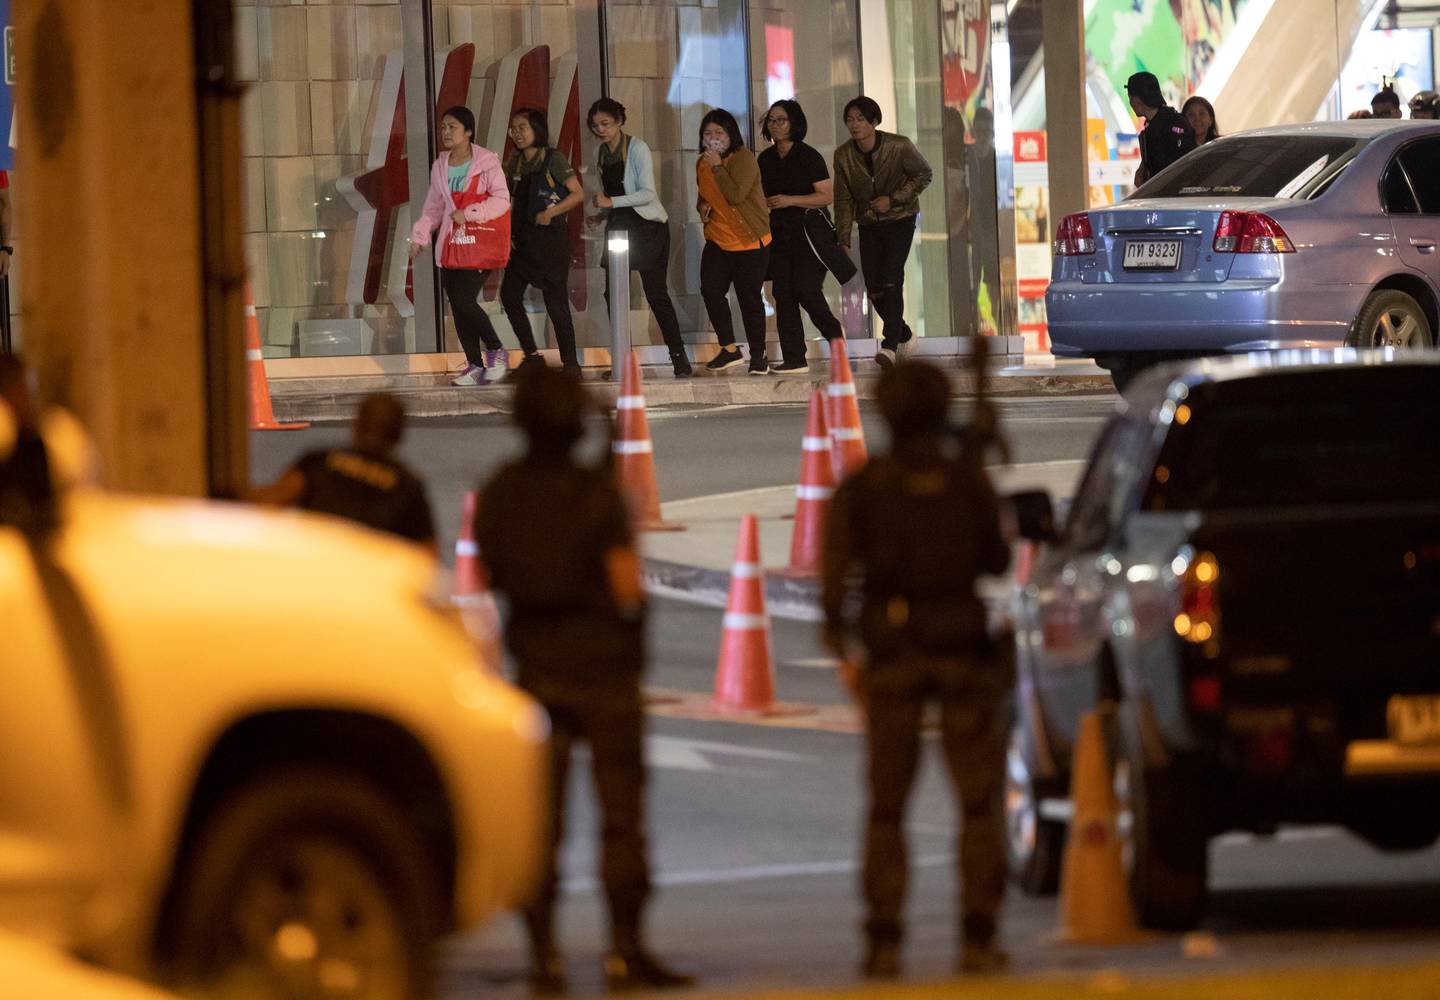 People who were able to get out of Terminal 21 Korat mall walk outside the building in Nakhon Ratchasima, Thailand on Sunday, Feb. 9, 2020. A soldier who holed up in a popular shopping mall in northeastern Thailand shot multiple people on Saturday, killing at least 20 and injuring 31 others, officials said. (AP Photo/Sakchai Lalitkanjanakul)